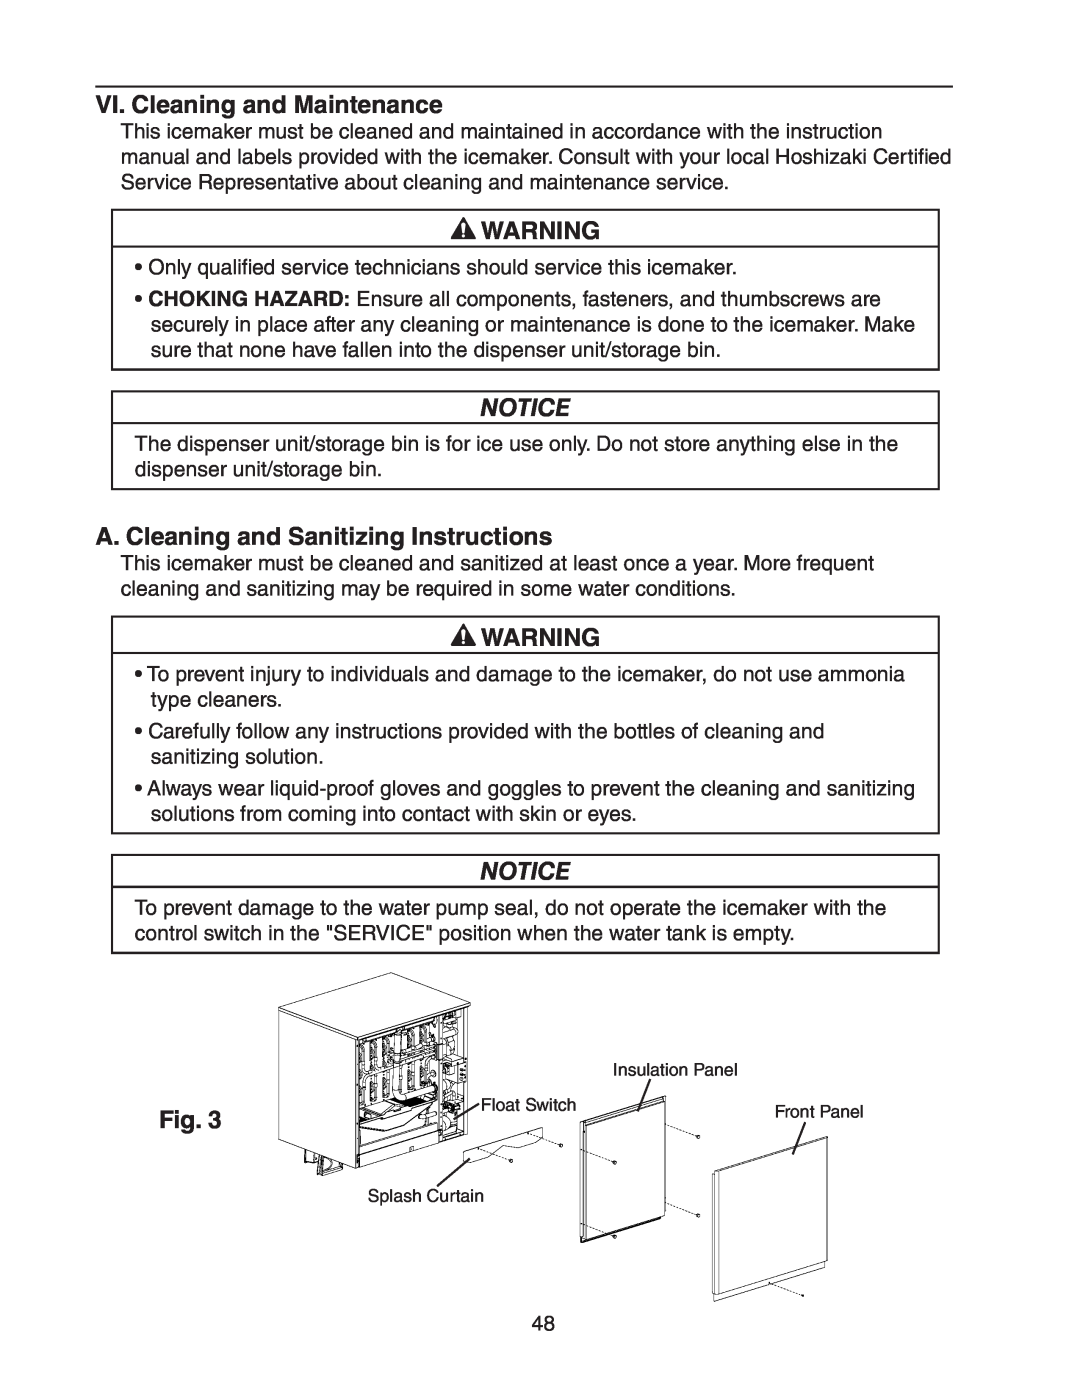 Hoshizaki KMS-1401MLJ service manual VI. Cleaning and Maintenance, A. Cleaning and Sanitizing Instructions 